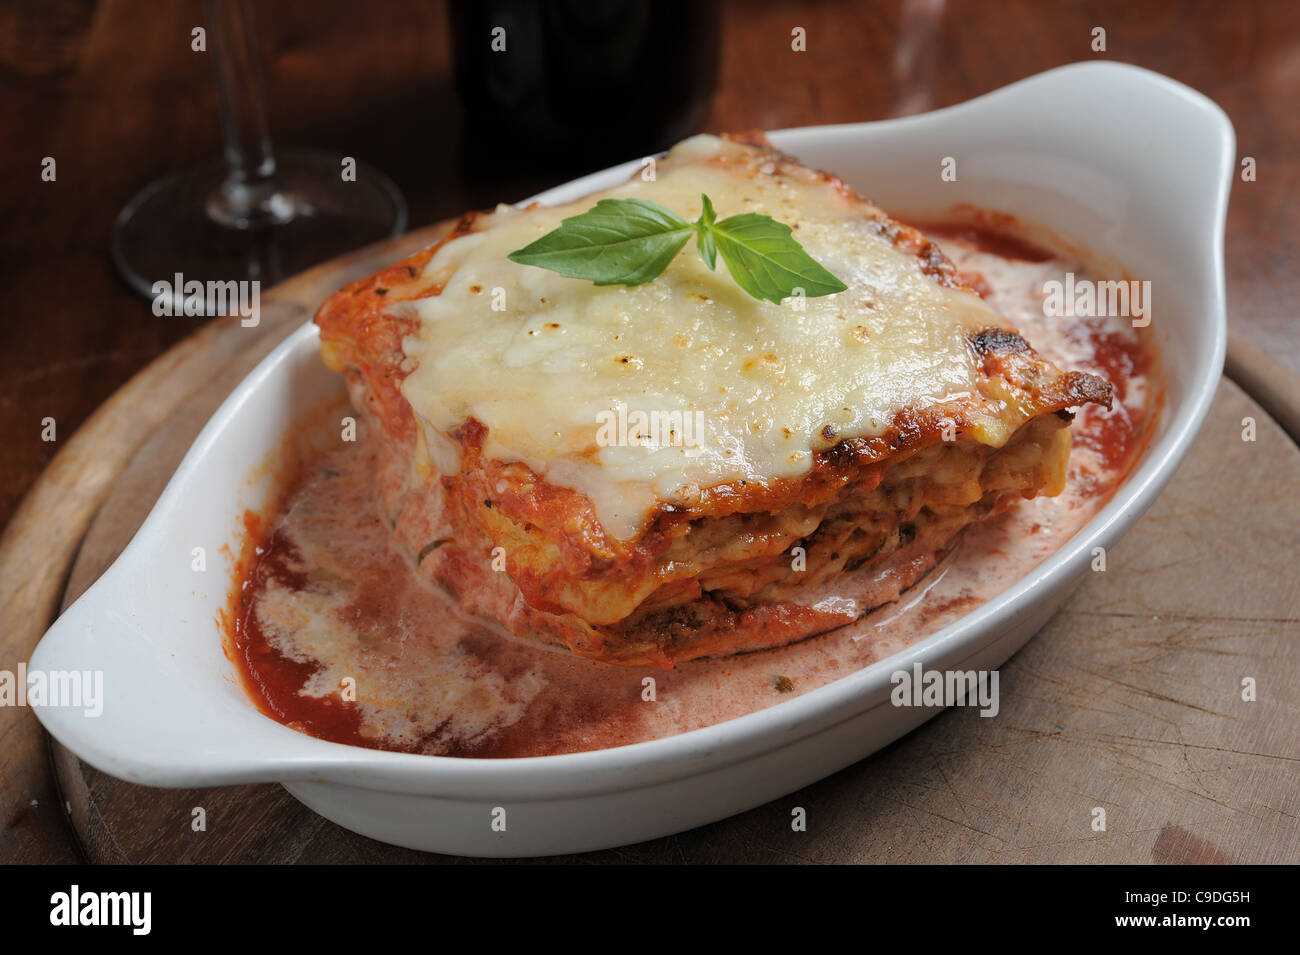 a serving of Cheese crusted lasagna Stock Photo